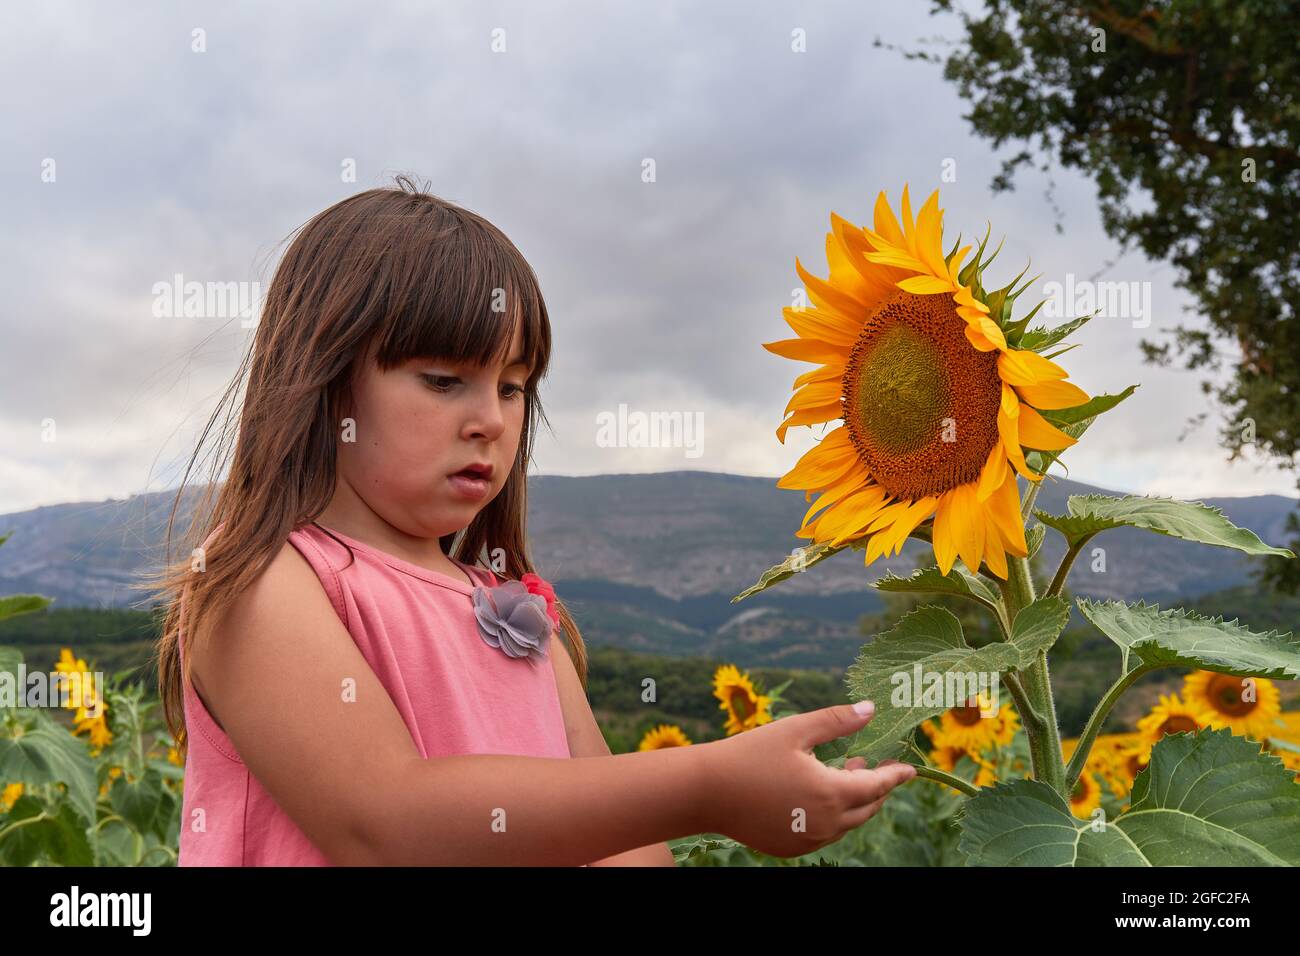 Girl in the sunflowers field with sunflowers Stock Photo